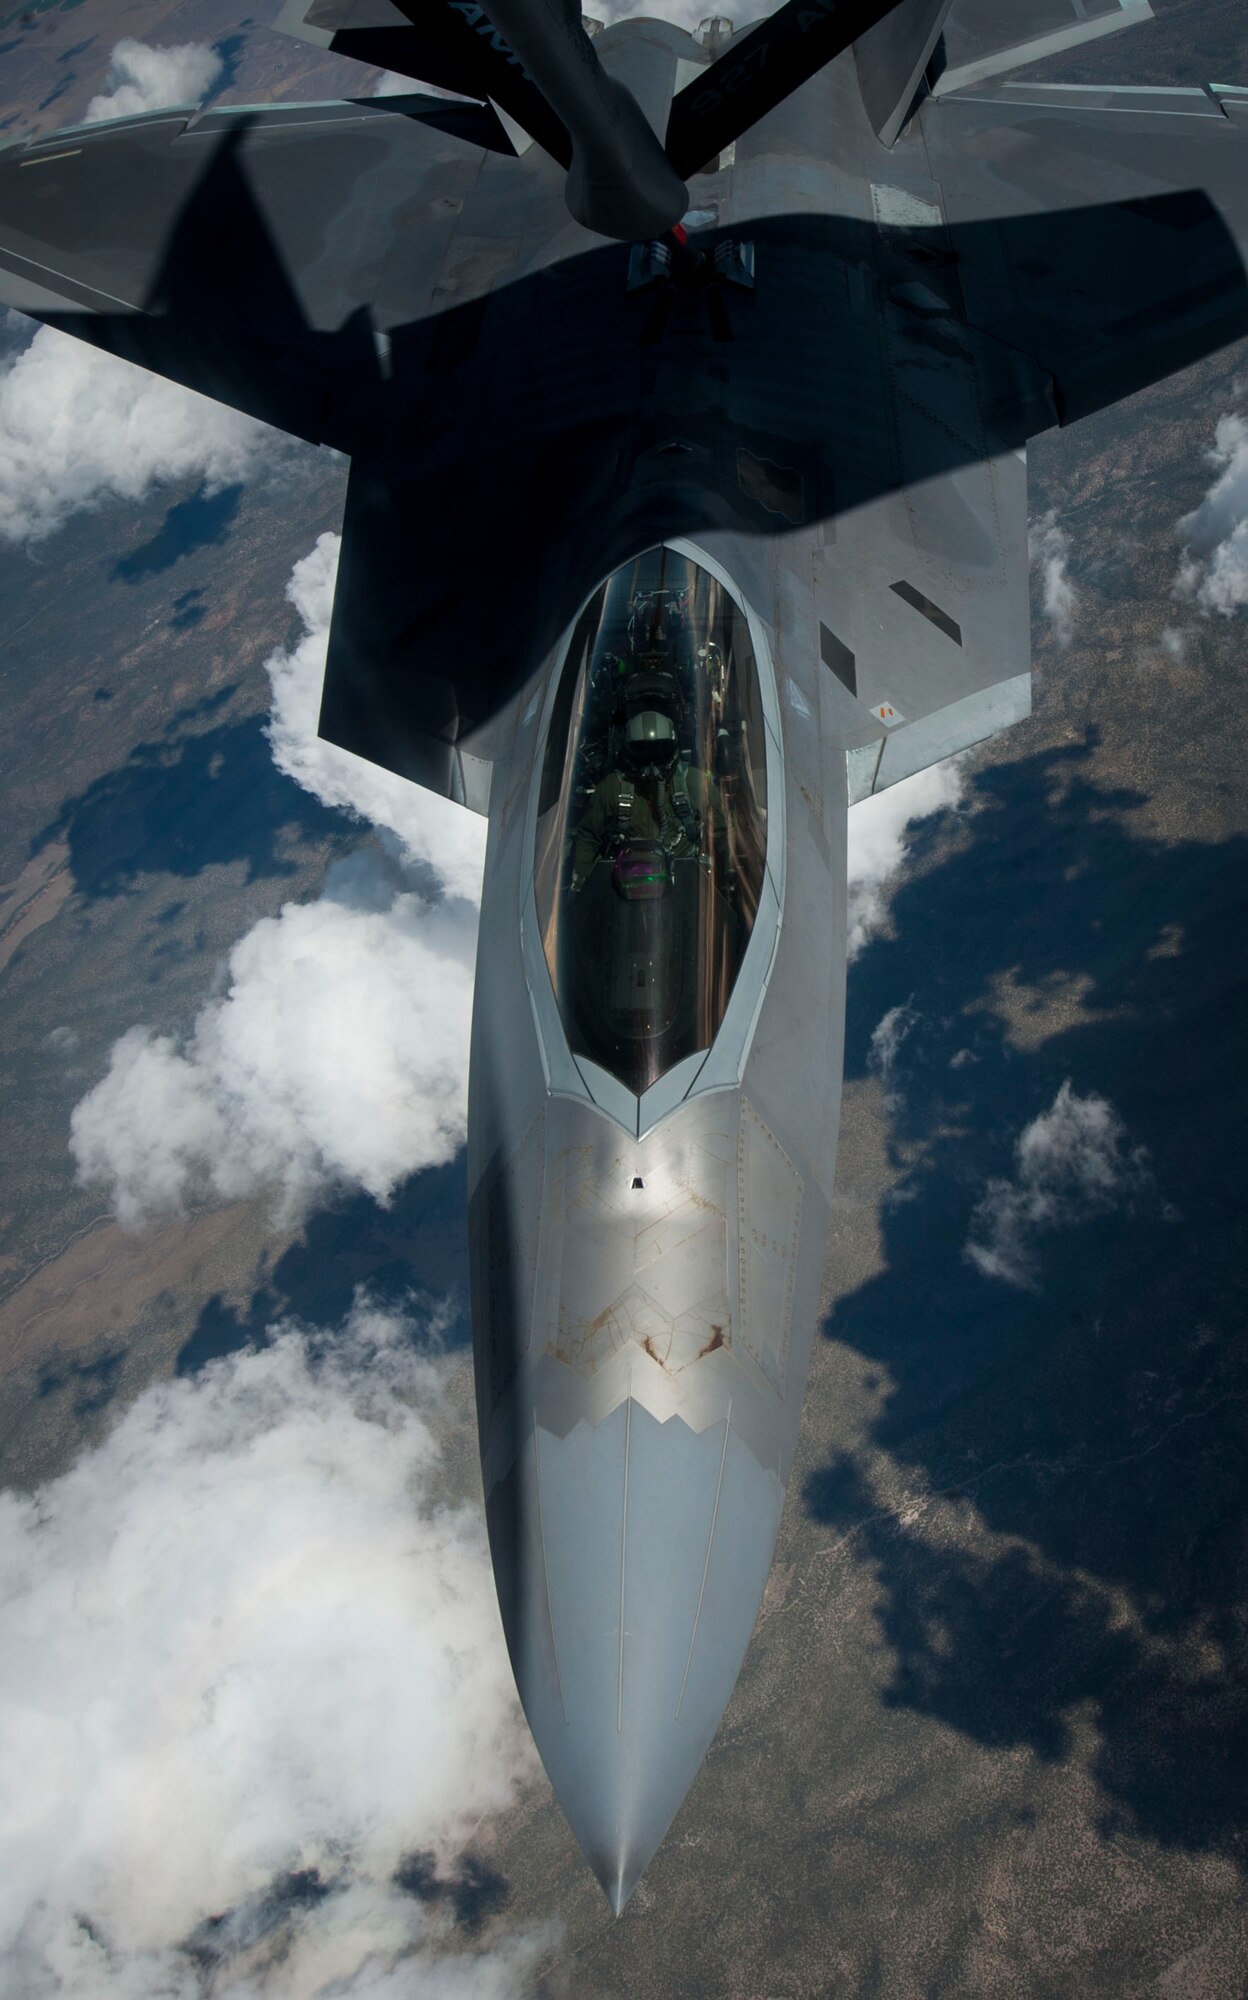 An F-22 Raptor, from Joint Base Langley-Eustis, Va., receives fuel from a KC-135 Stratotanker over the Nevada Test and Training Range during a training sortie during Red Flag 16-3, July 21, 2016. With the F-35B also participating in the exercise, this is the first exercise that both F-22 and F-35 airframes will participate in Red Flag. (U.S. Air Force photo by Senior Airman Jake Carter/Released)